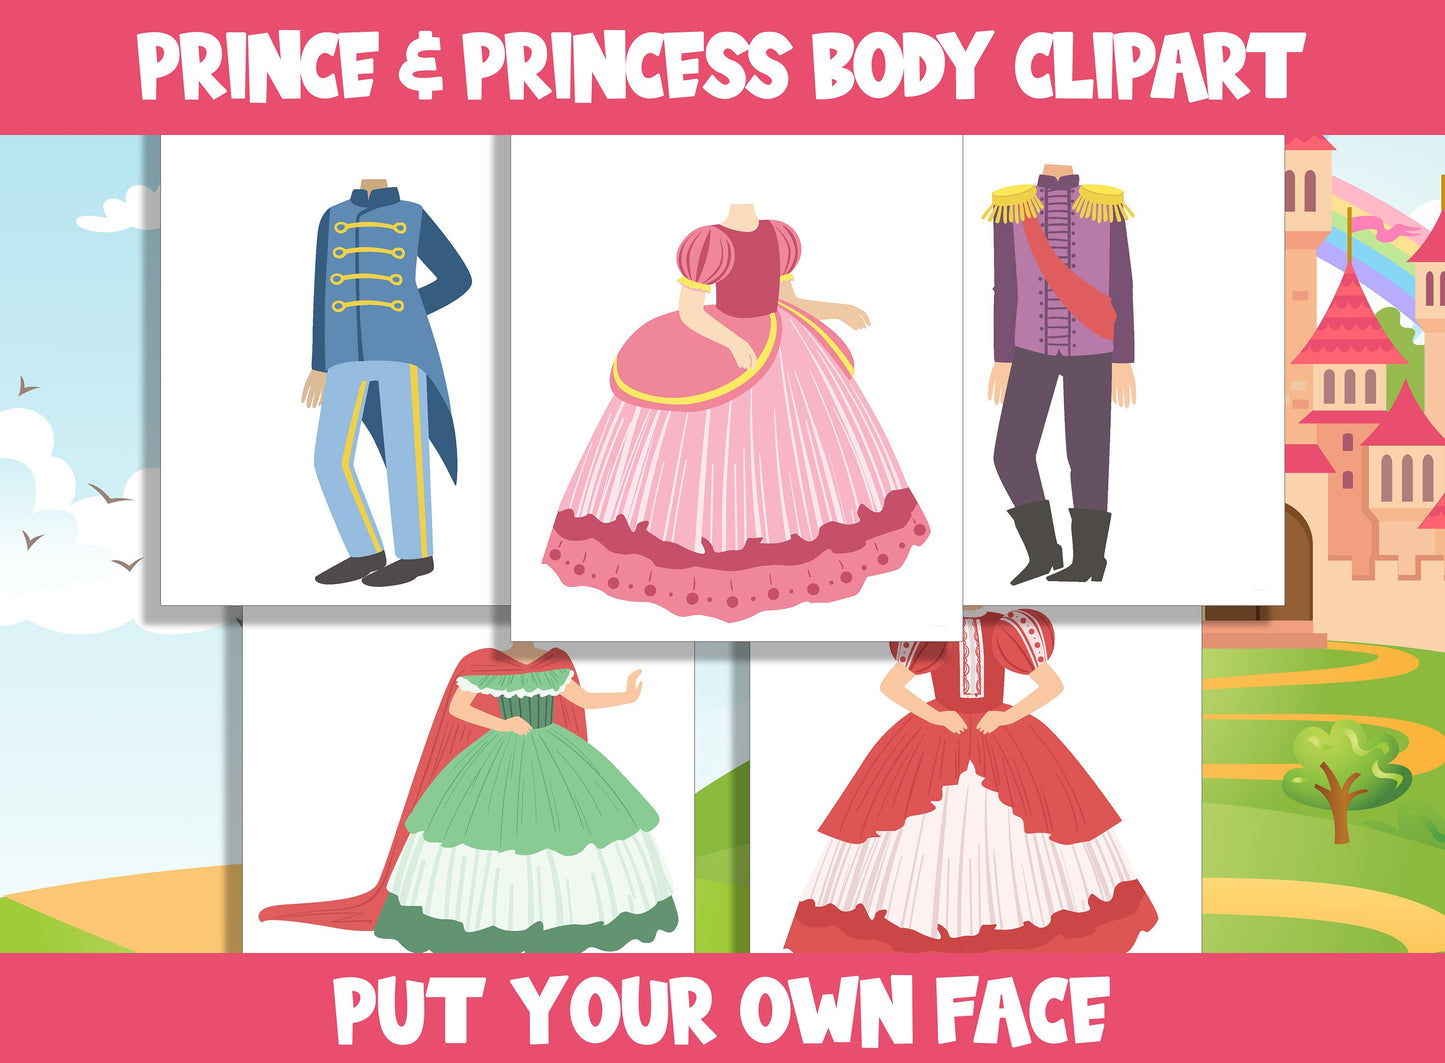 Prince and Princess Body Clipart Collection for PreK to 6th Grade, 20 Pages, PDF File, Instant Download